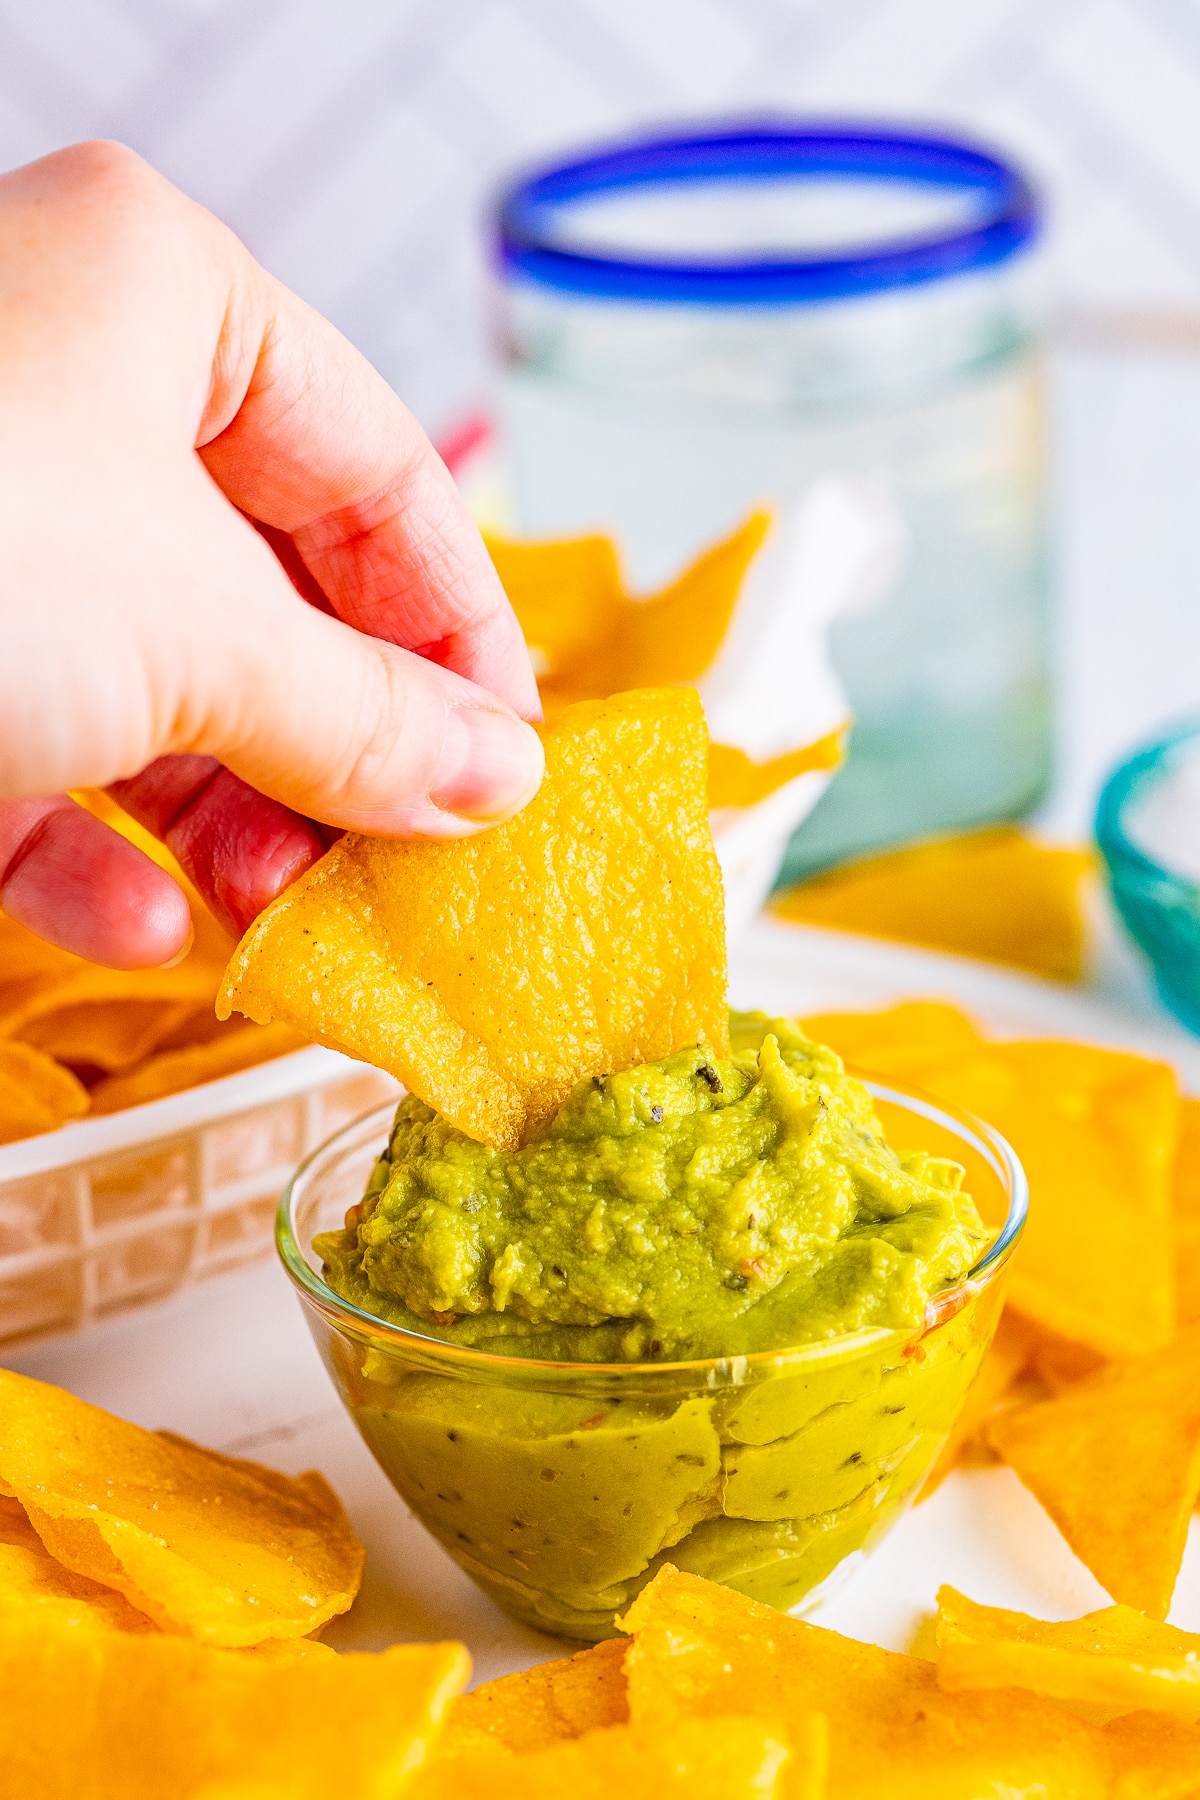 A hand holding a homemade fried tortilla dipping into guacamole